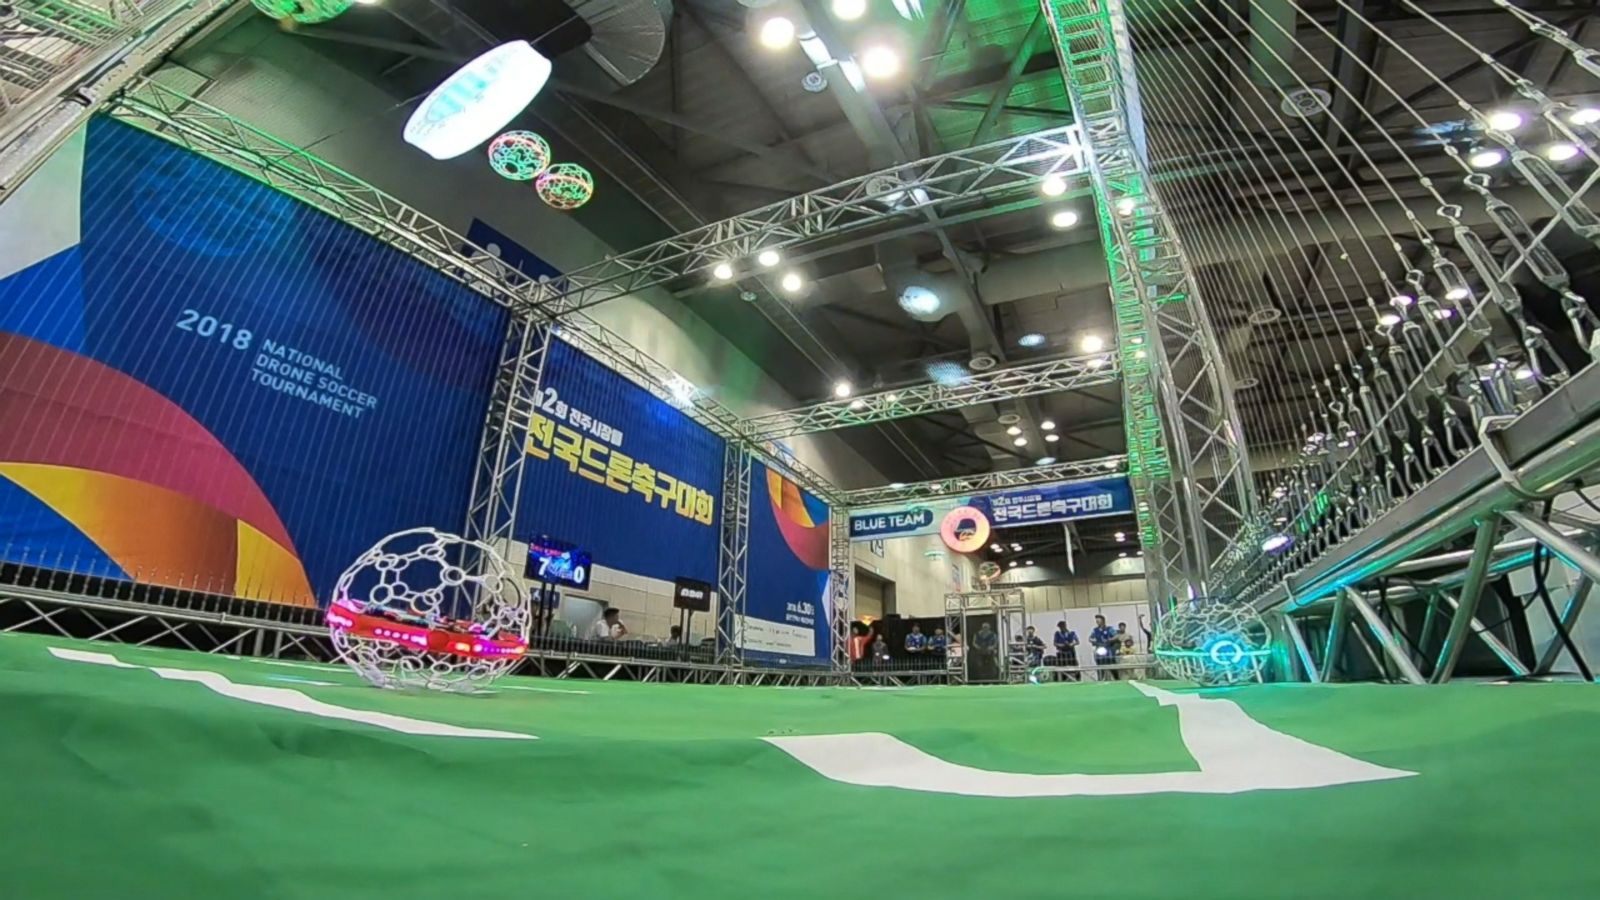 Drone soccer tournaments are coming to the United States: register now